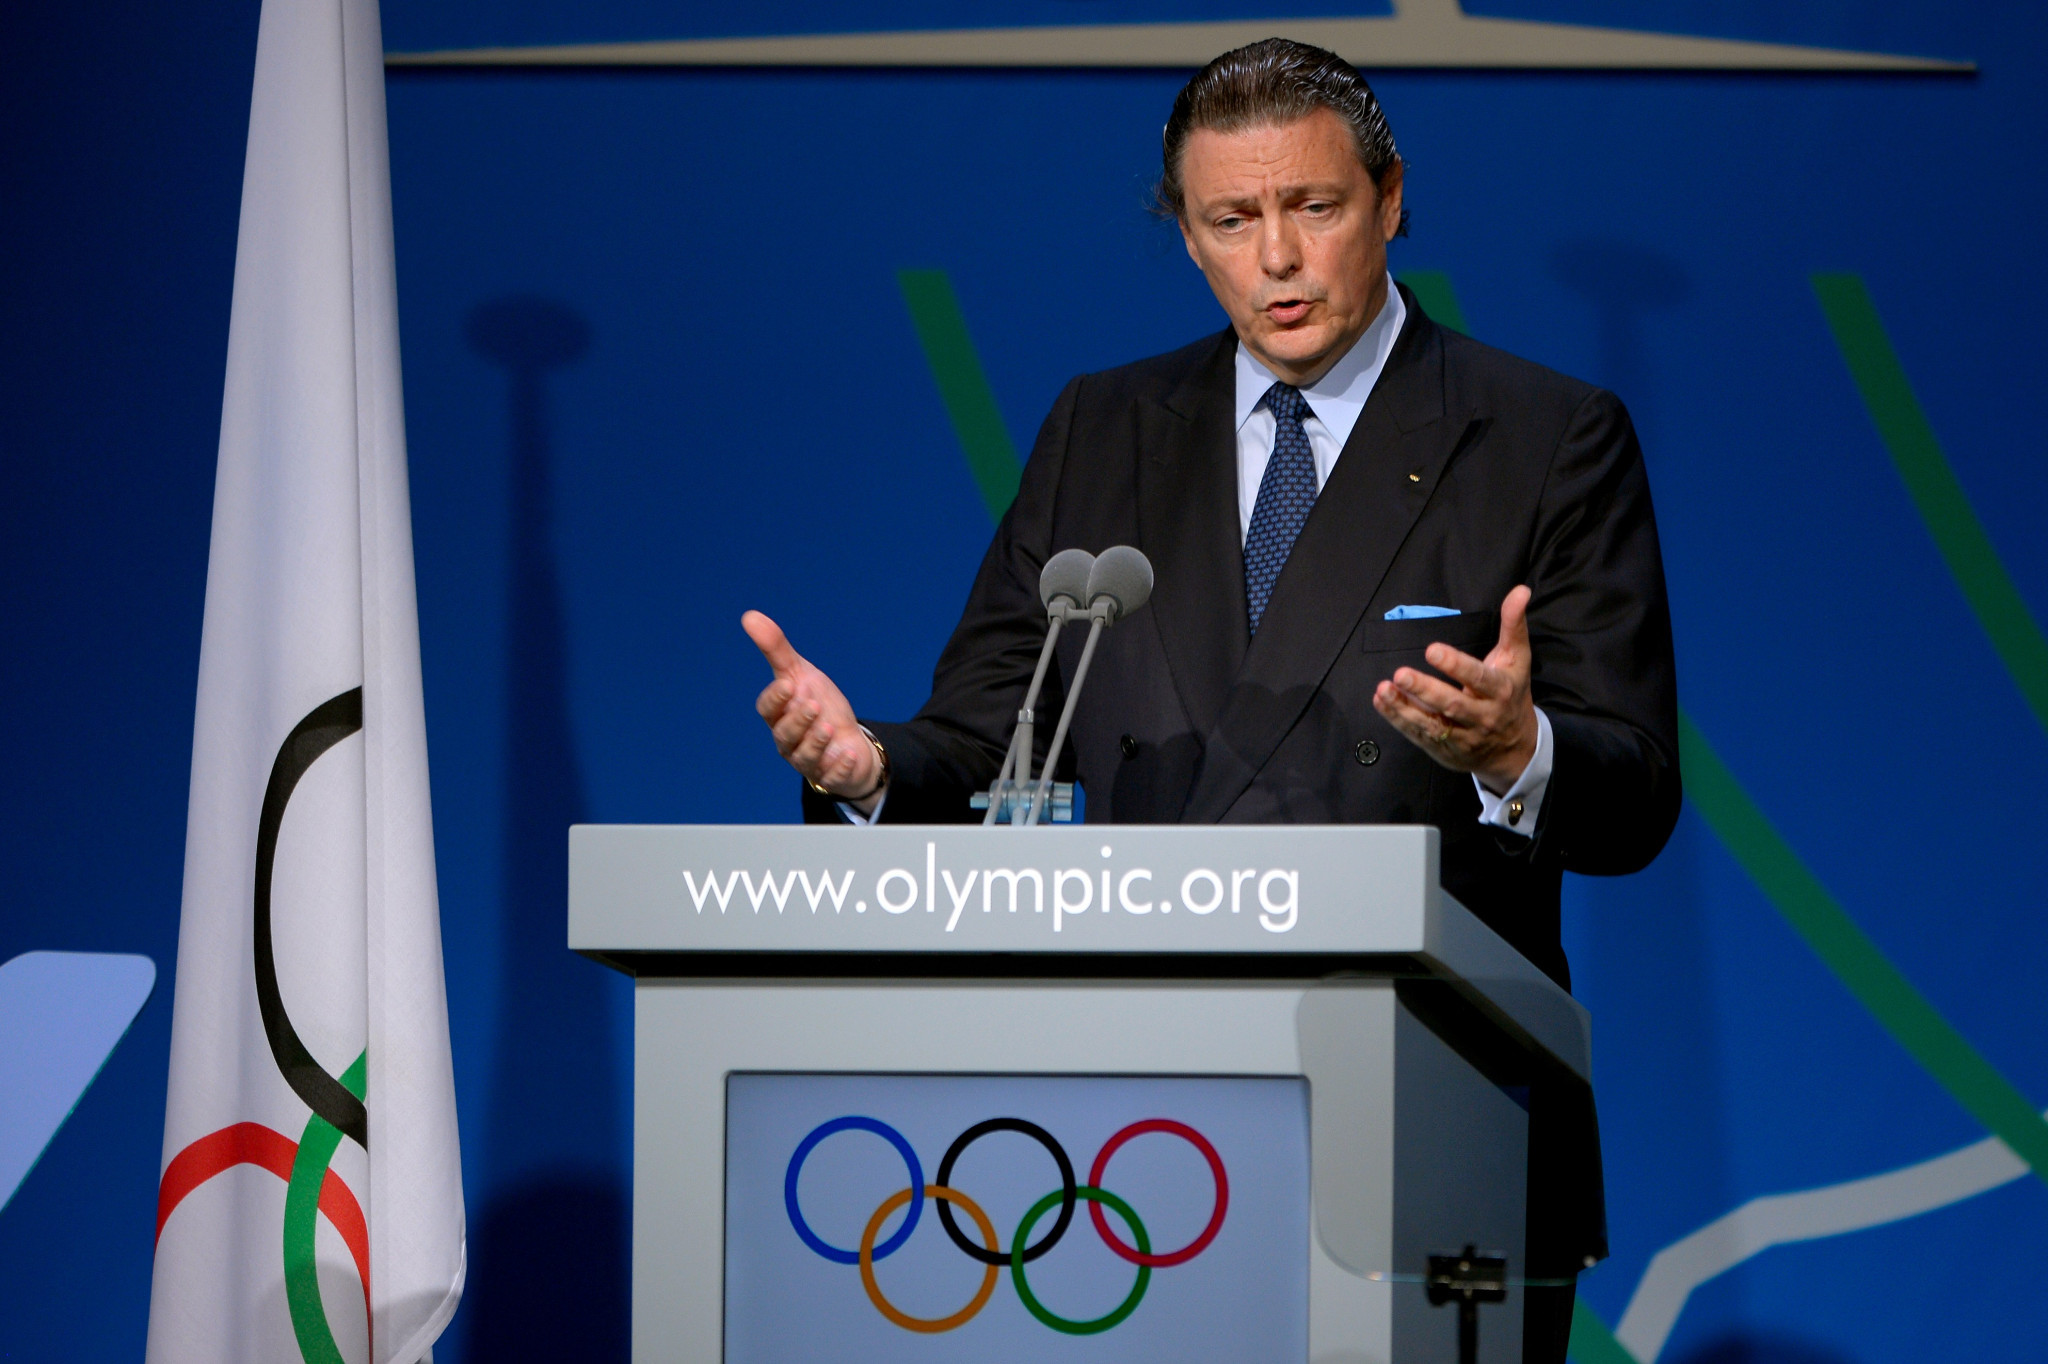 Richard Carrión was the closest challenger to Thomas Bach in the 2013 IOC Presidential election ©Getty Images